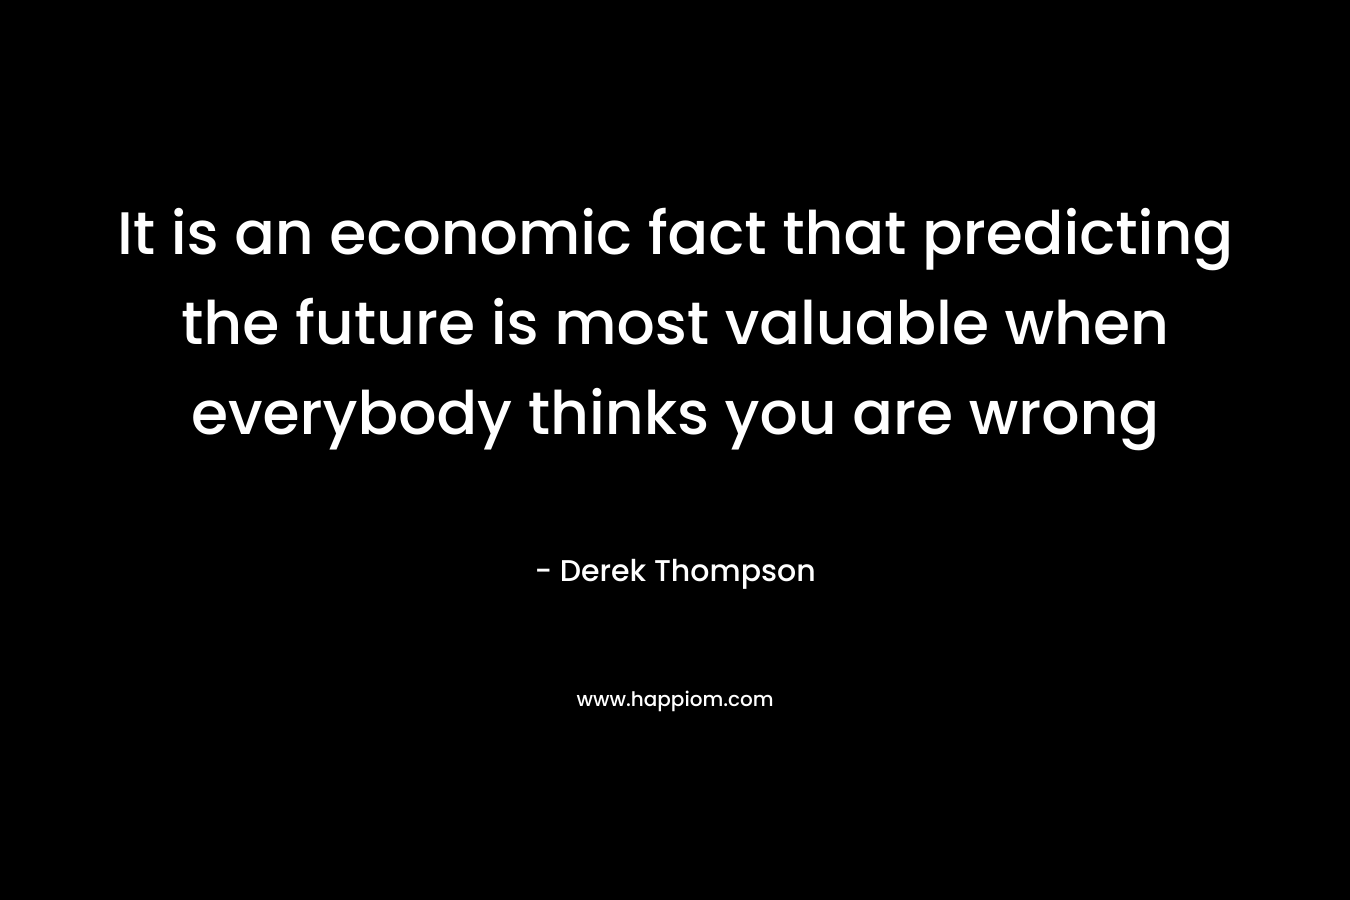 It is an economic fact that predicting the future is most valuable when everybody thinks you are wrong – Derek Thompson